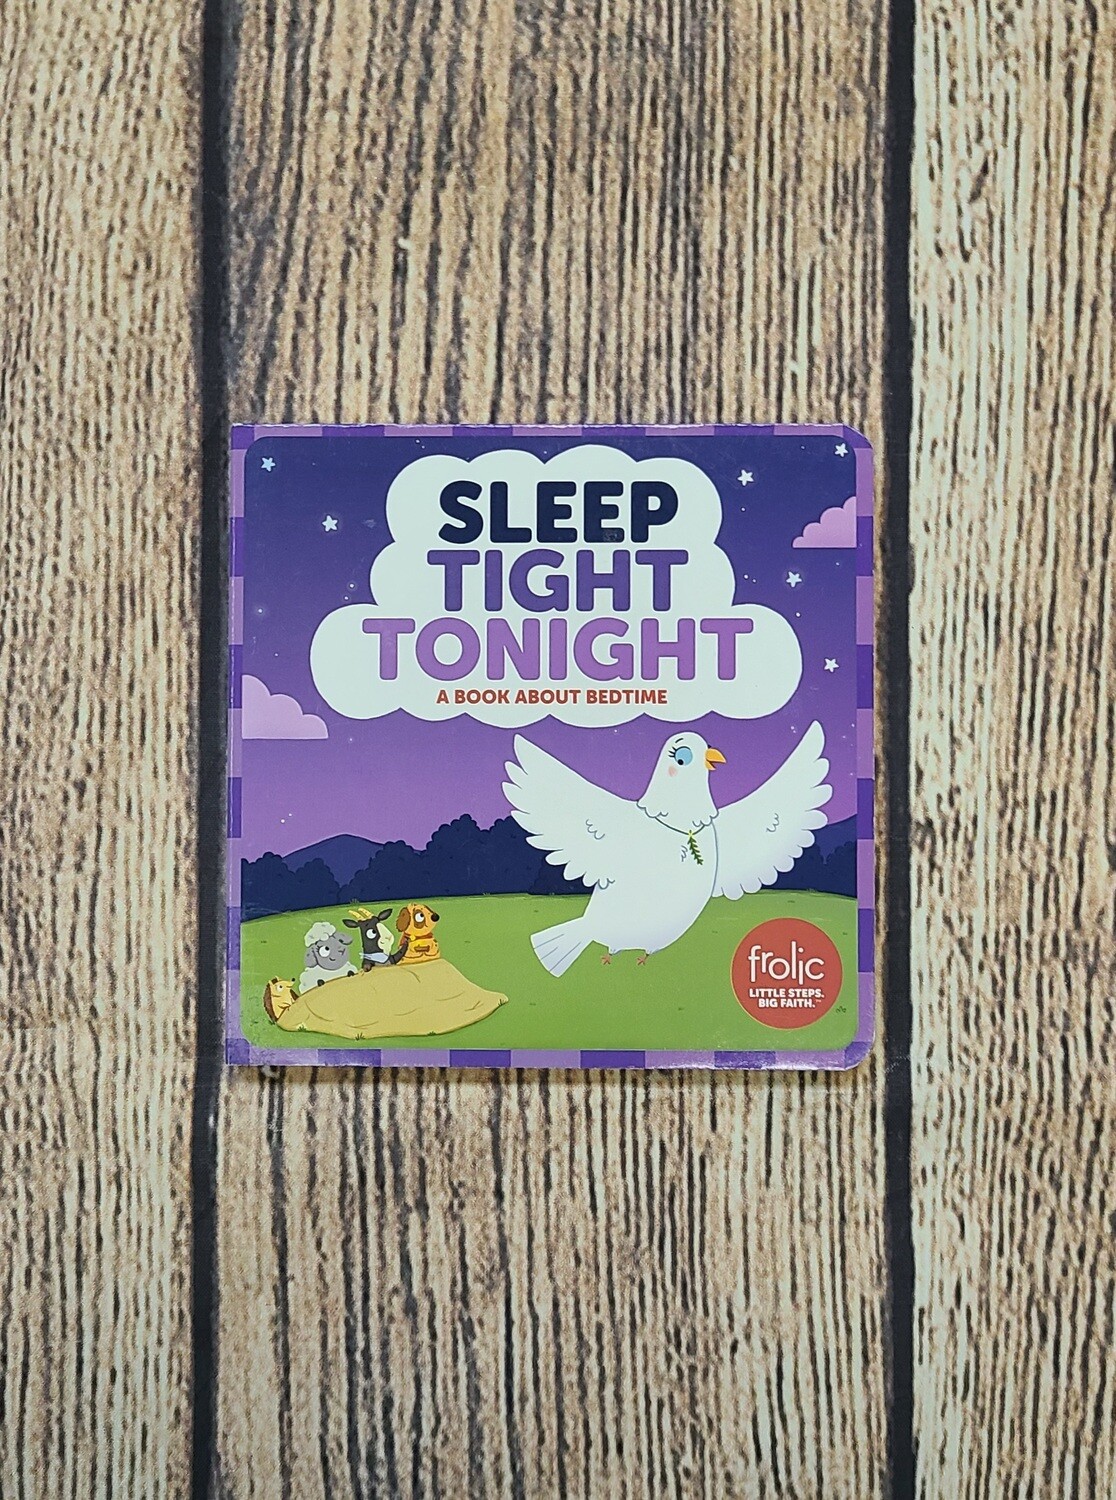 Sleep Tight Tonight: A Book About Bedtime by Kristen McCurry and Jennifer Hilton